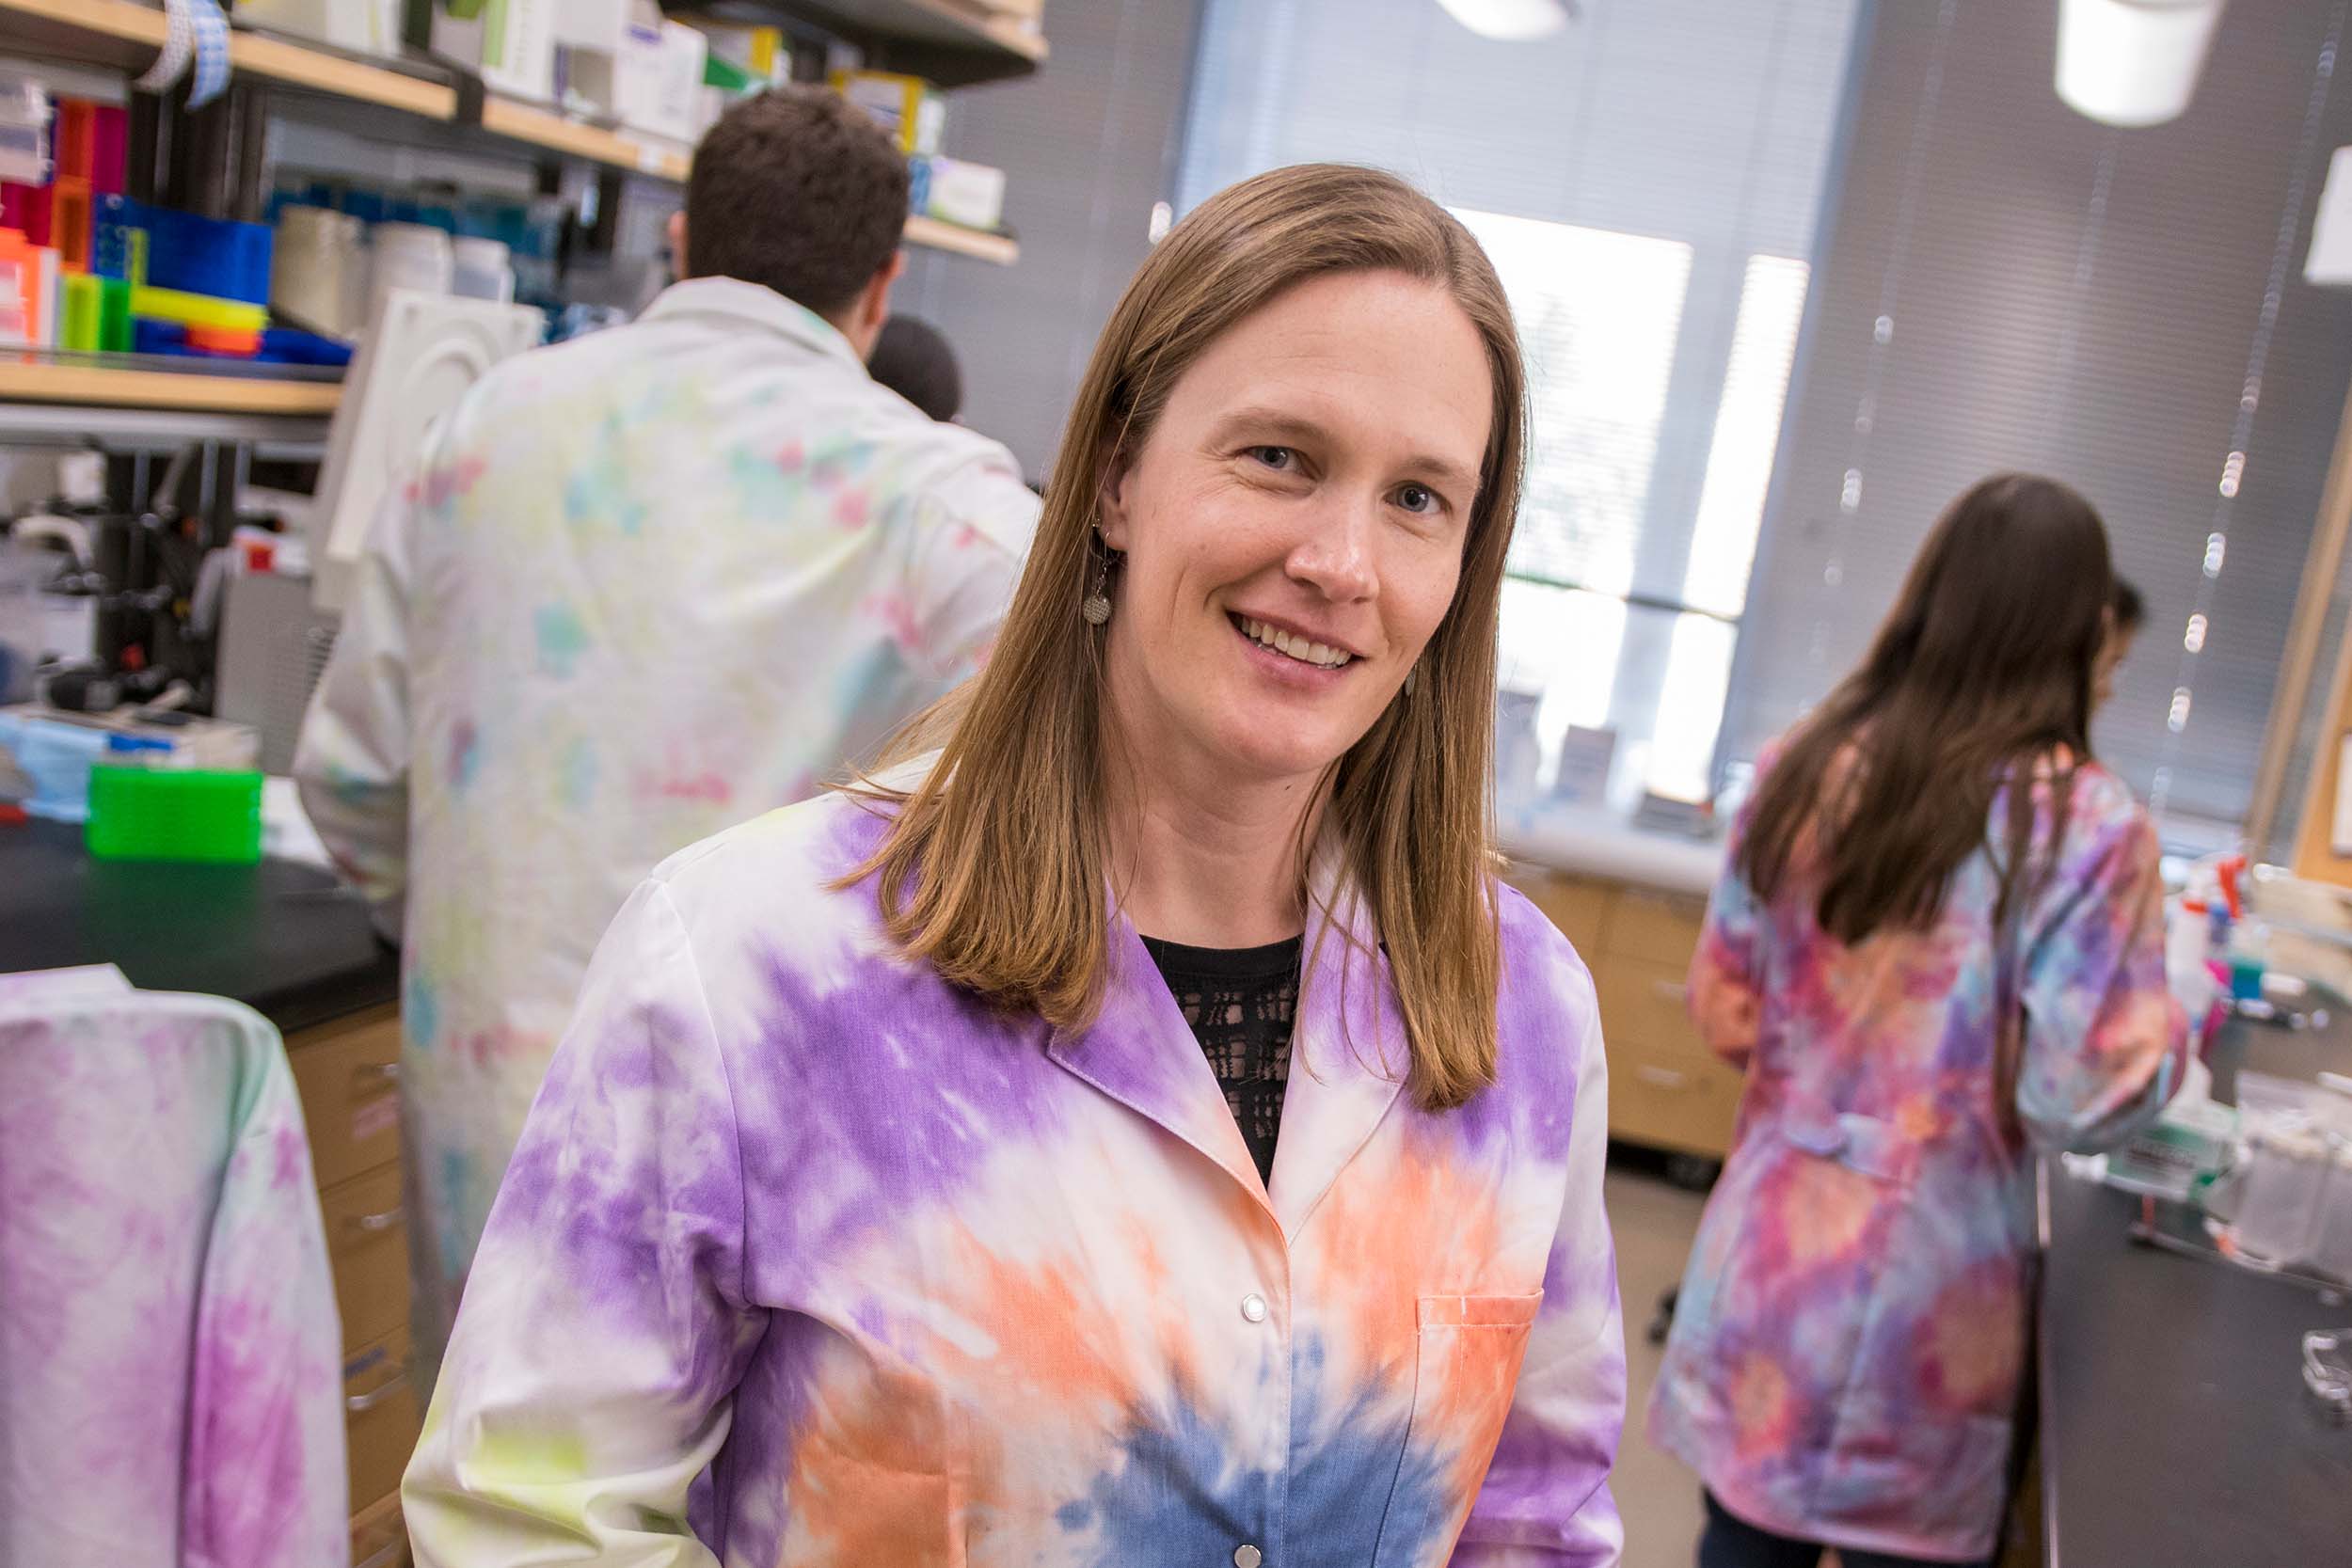 Sarah Stabenfeldt, sporting a colorful tie-dyed lab coat, smiles for the camera in her lab among other researchers